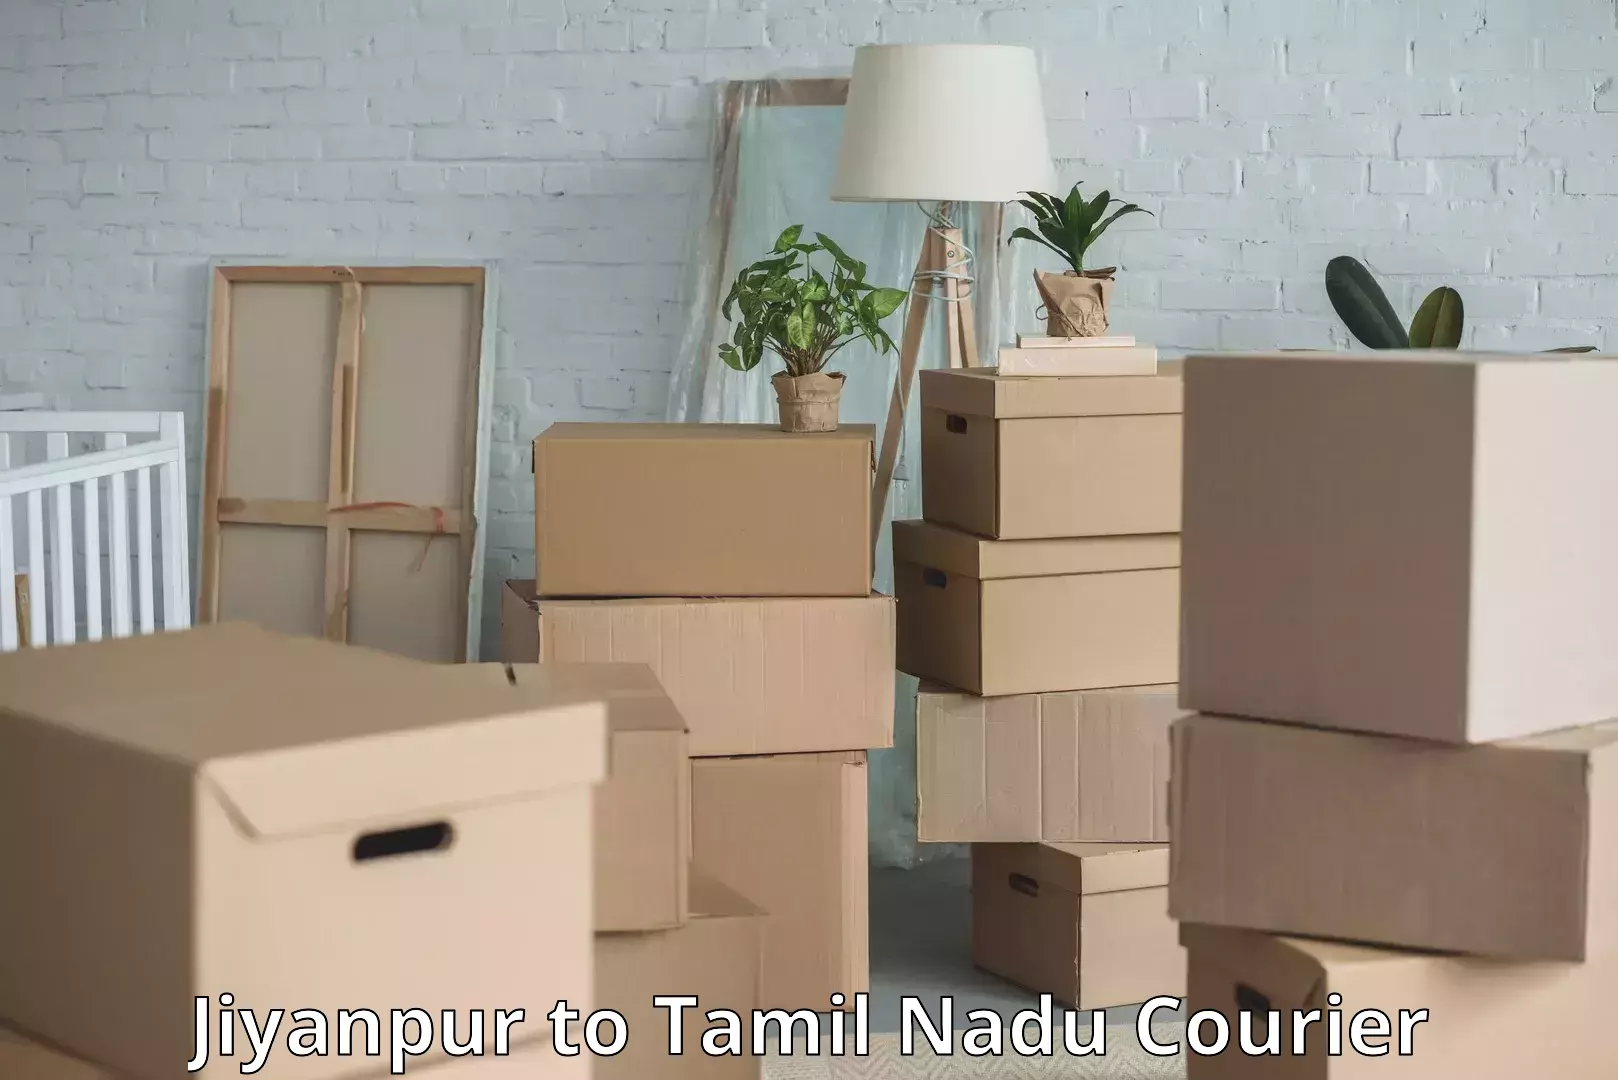 Luggage delivery network Jiyanpur to Tamil Nadu